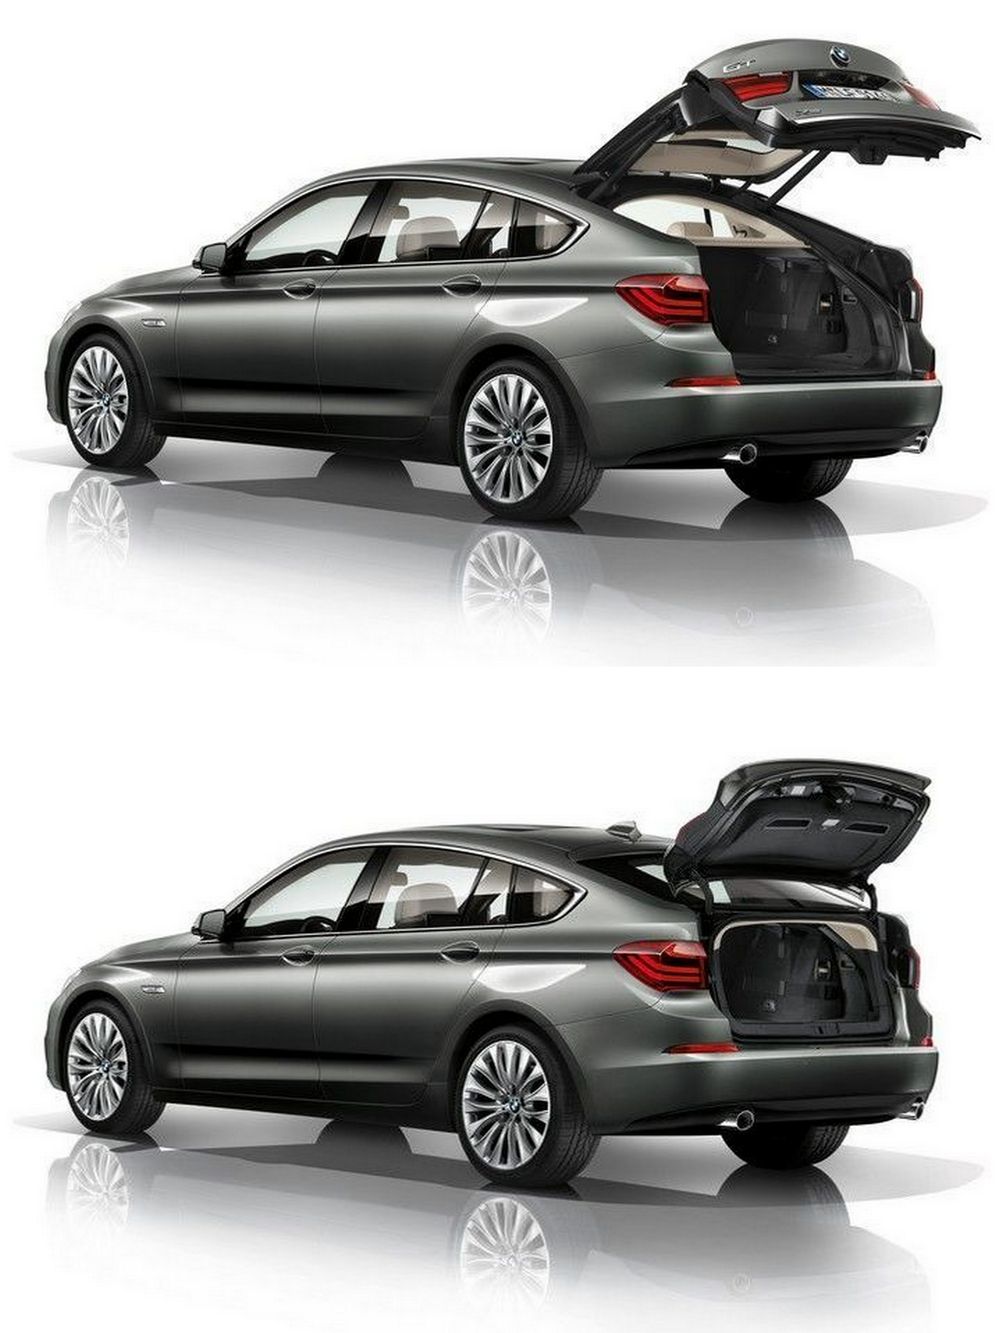 BMW 5 Series Gran Turismo - trunk, two options for opening the tailgate